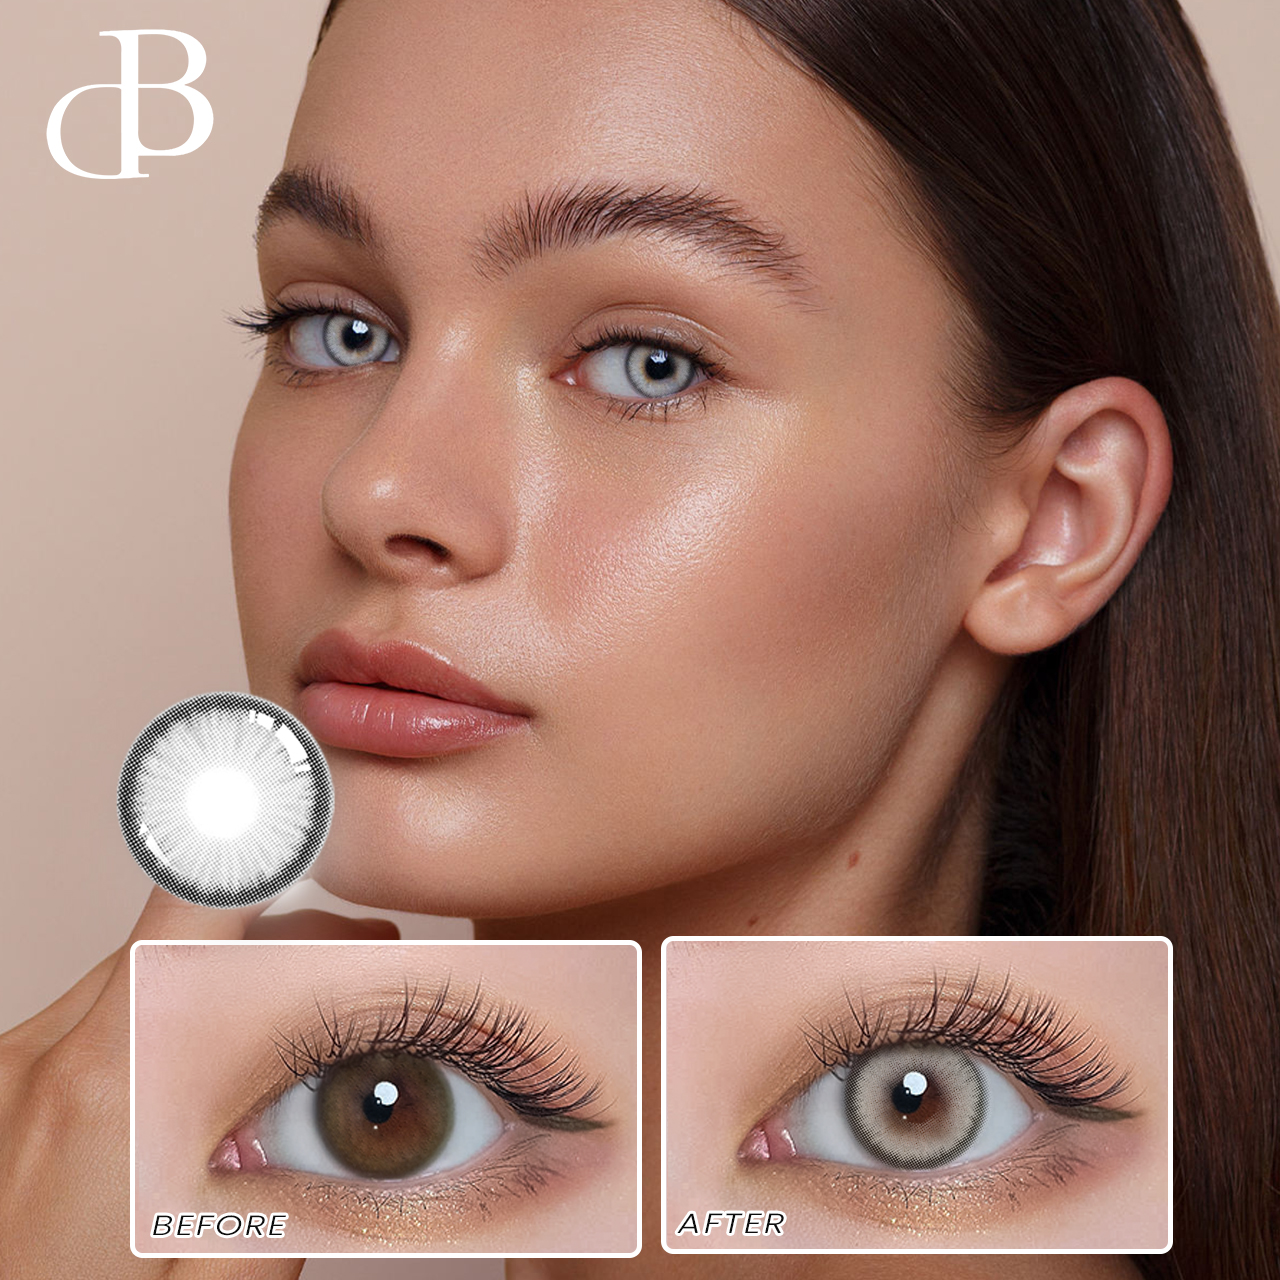 Honey moonlight 1 year in stock available super soft and natural color contact lenses